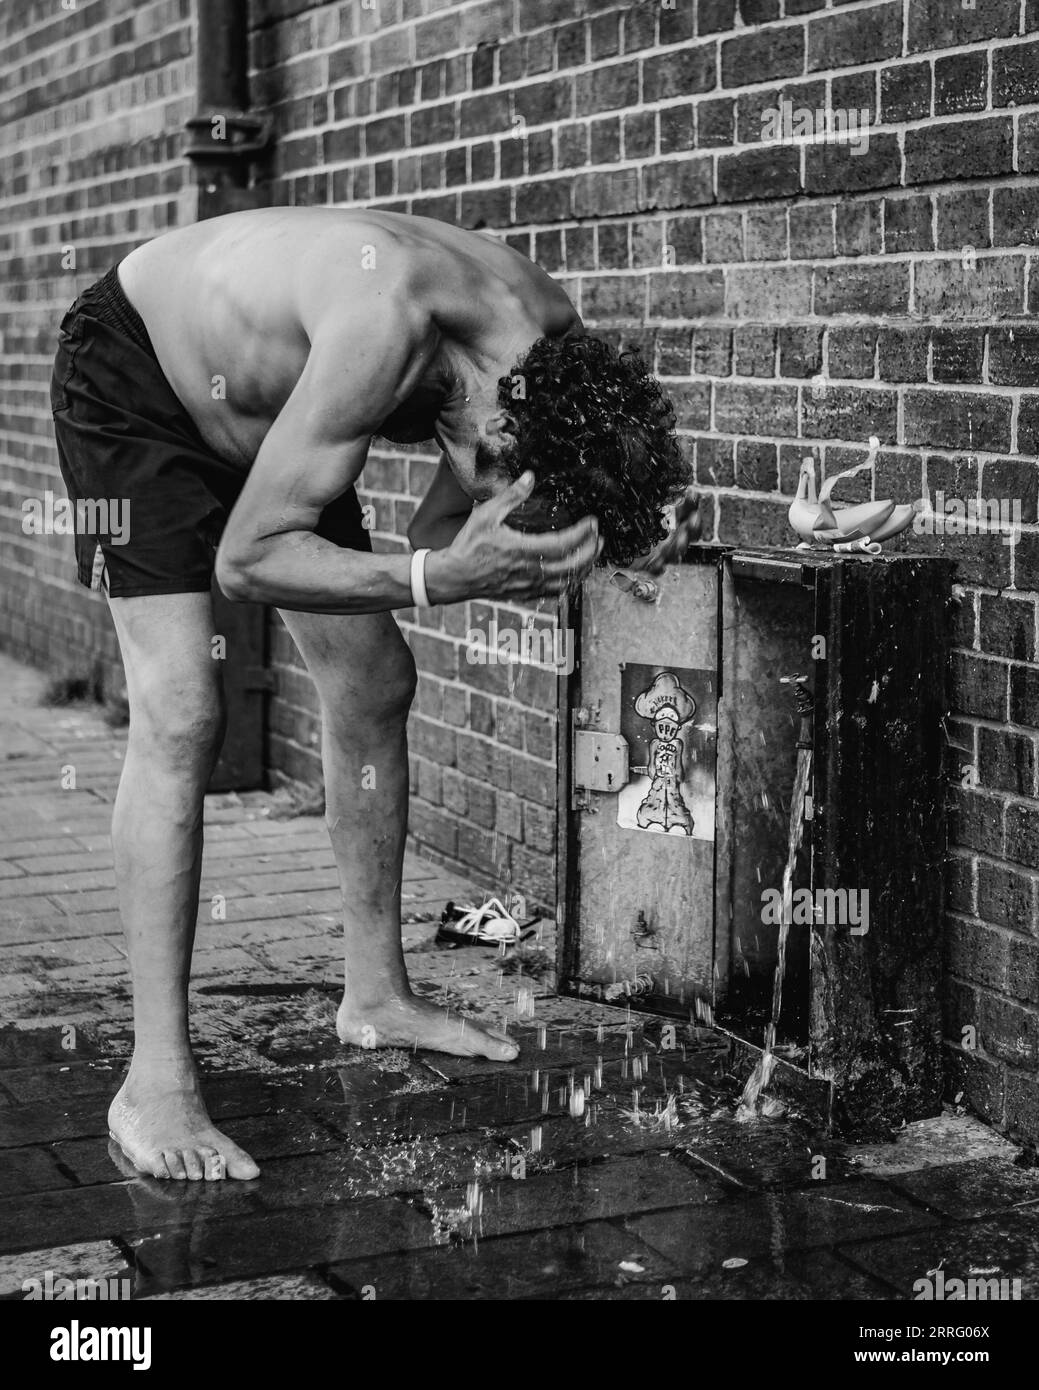 A man tries to keep cool in London's unexpected seering heat. Stock Photo